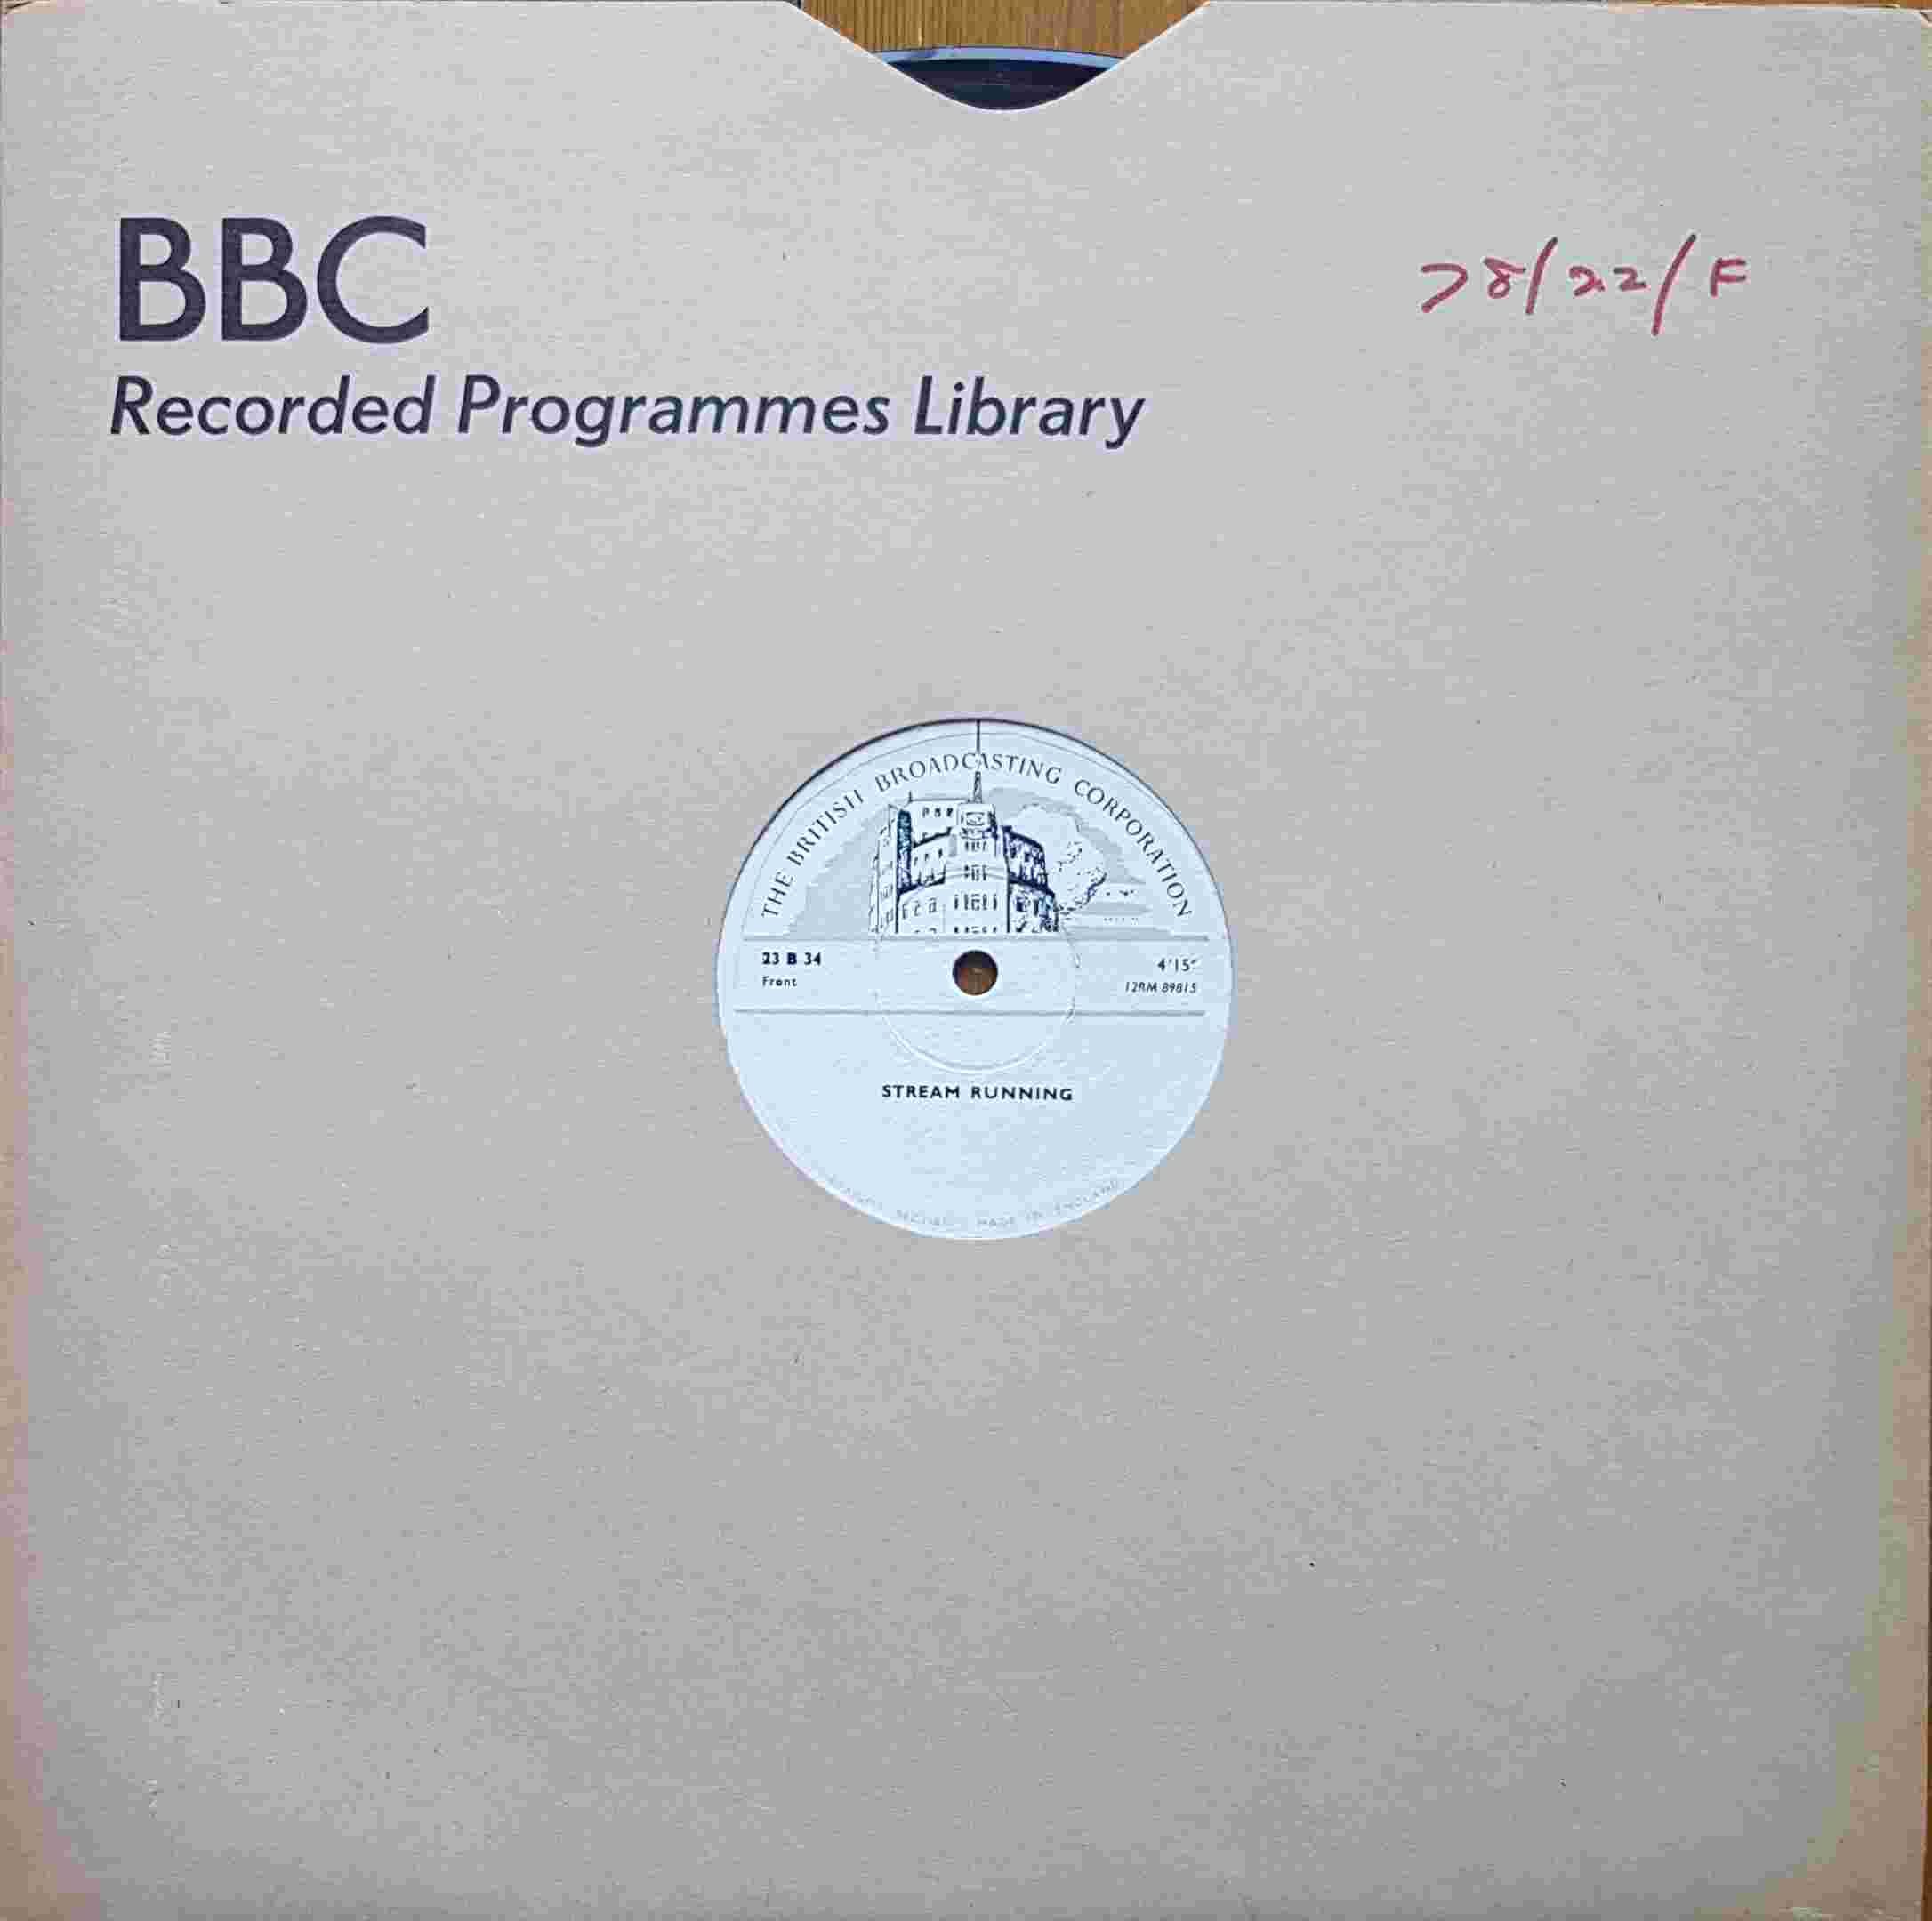 Picture of 23 B 34 Stream running by artist Not registered from the BBC 78 - Records and Tapes library